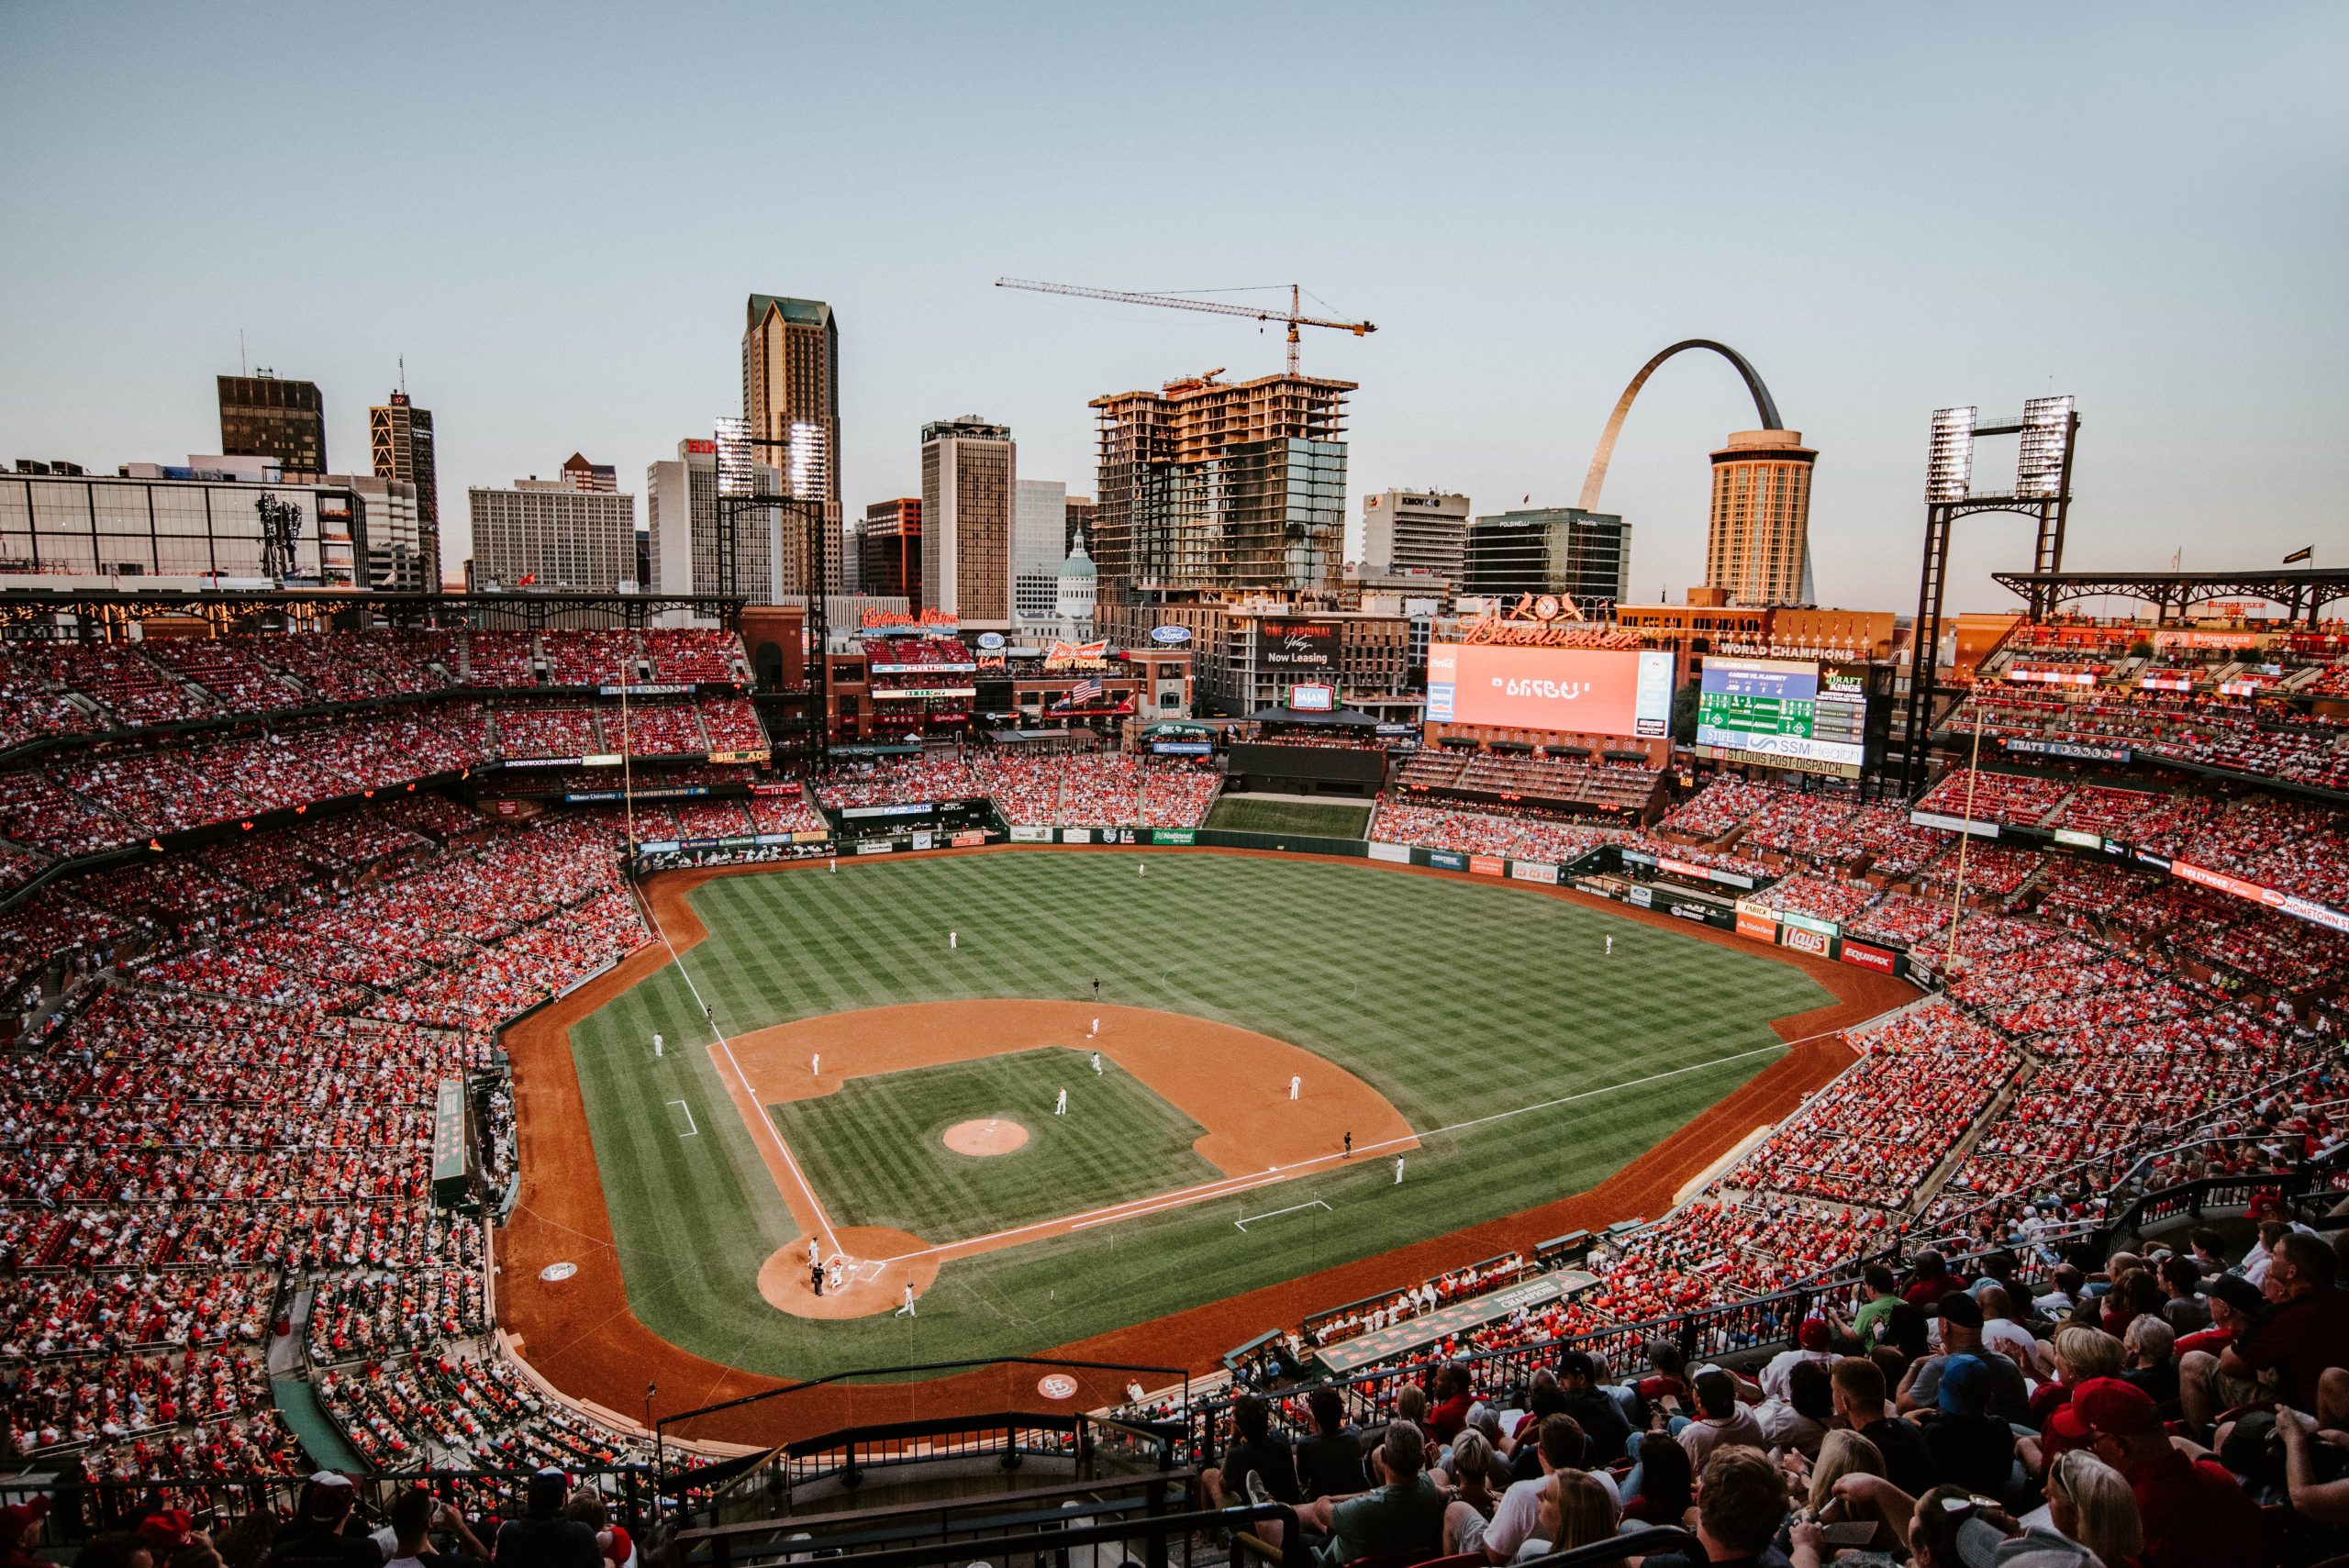 Photograph of Busch Stadium in St. Louis, filled with fans. A Cardinals game is underway, and the St. Louis arch is visible in the background.